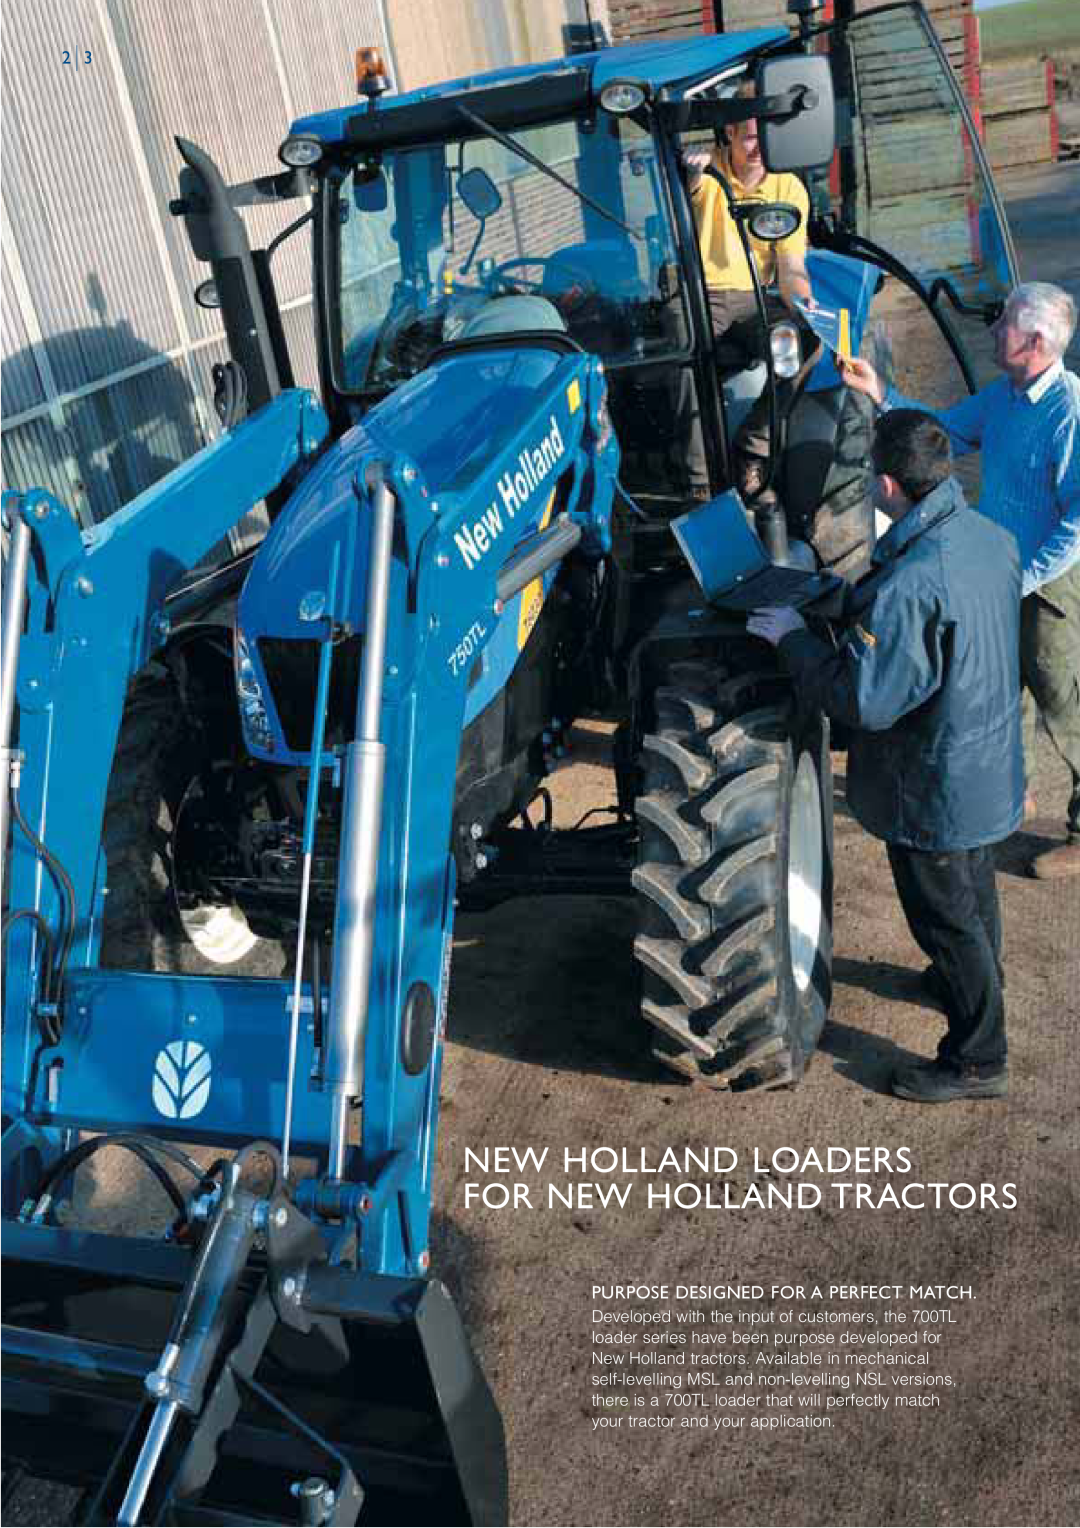 New Holland 76OTL, 74OTL, 77OTL, 75OTL New Holland Loaders For New Holland Tractors, Purpose Designed For A Perfect Match 